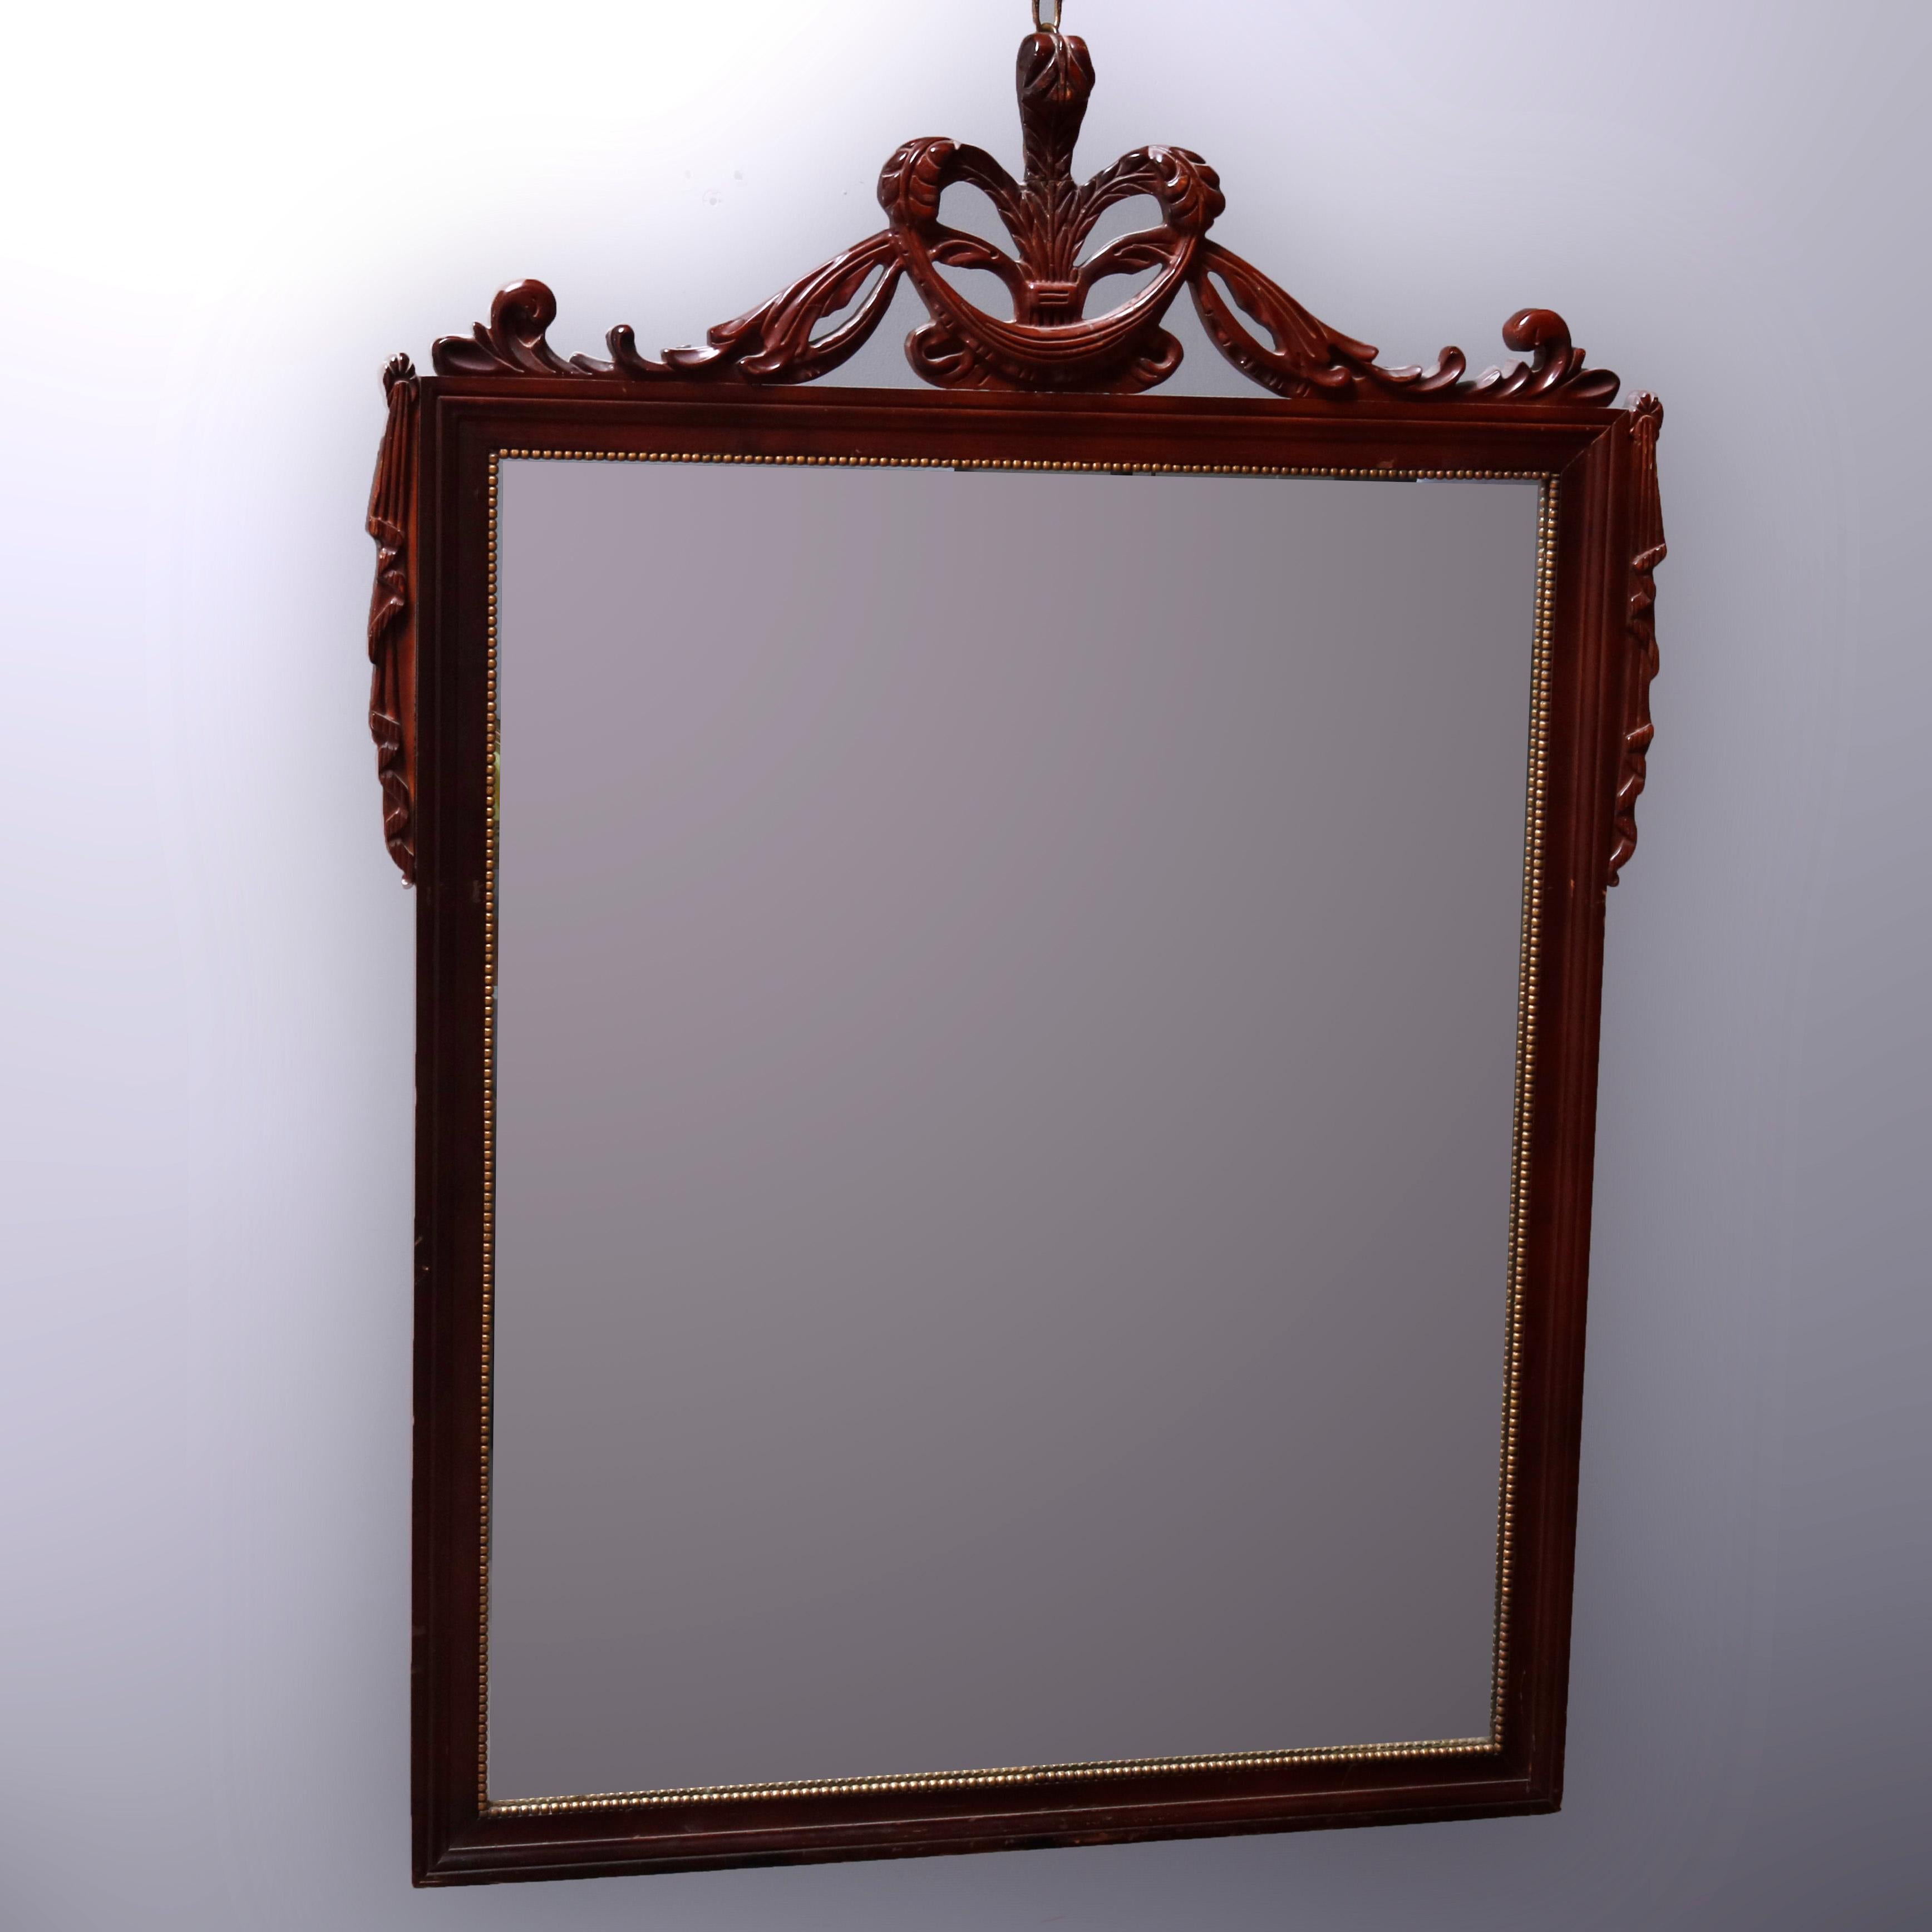 An antique Classical French wall mirror offers carved mahogany frame with pierced palmette fleur de lis crest with flanking draped garland and foliate elements, frame interior with gilt bead bordering, circa 1930

***DELIVERY NOTICE – Due to